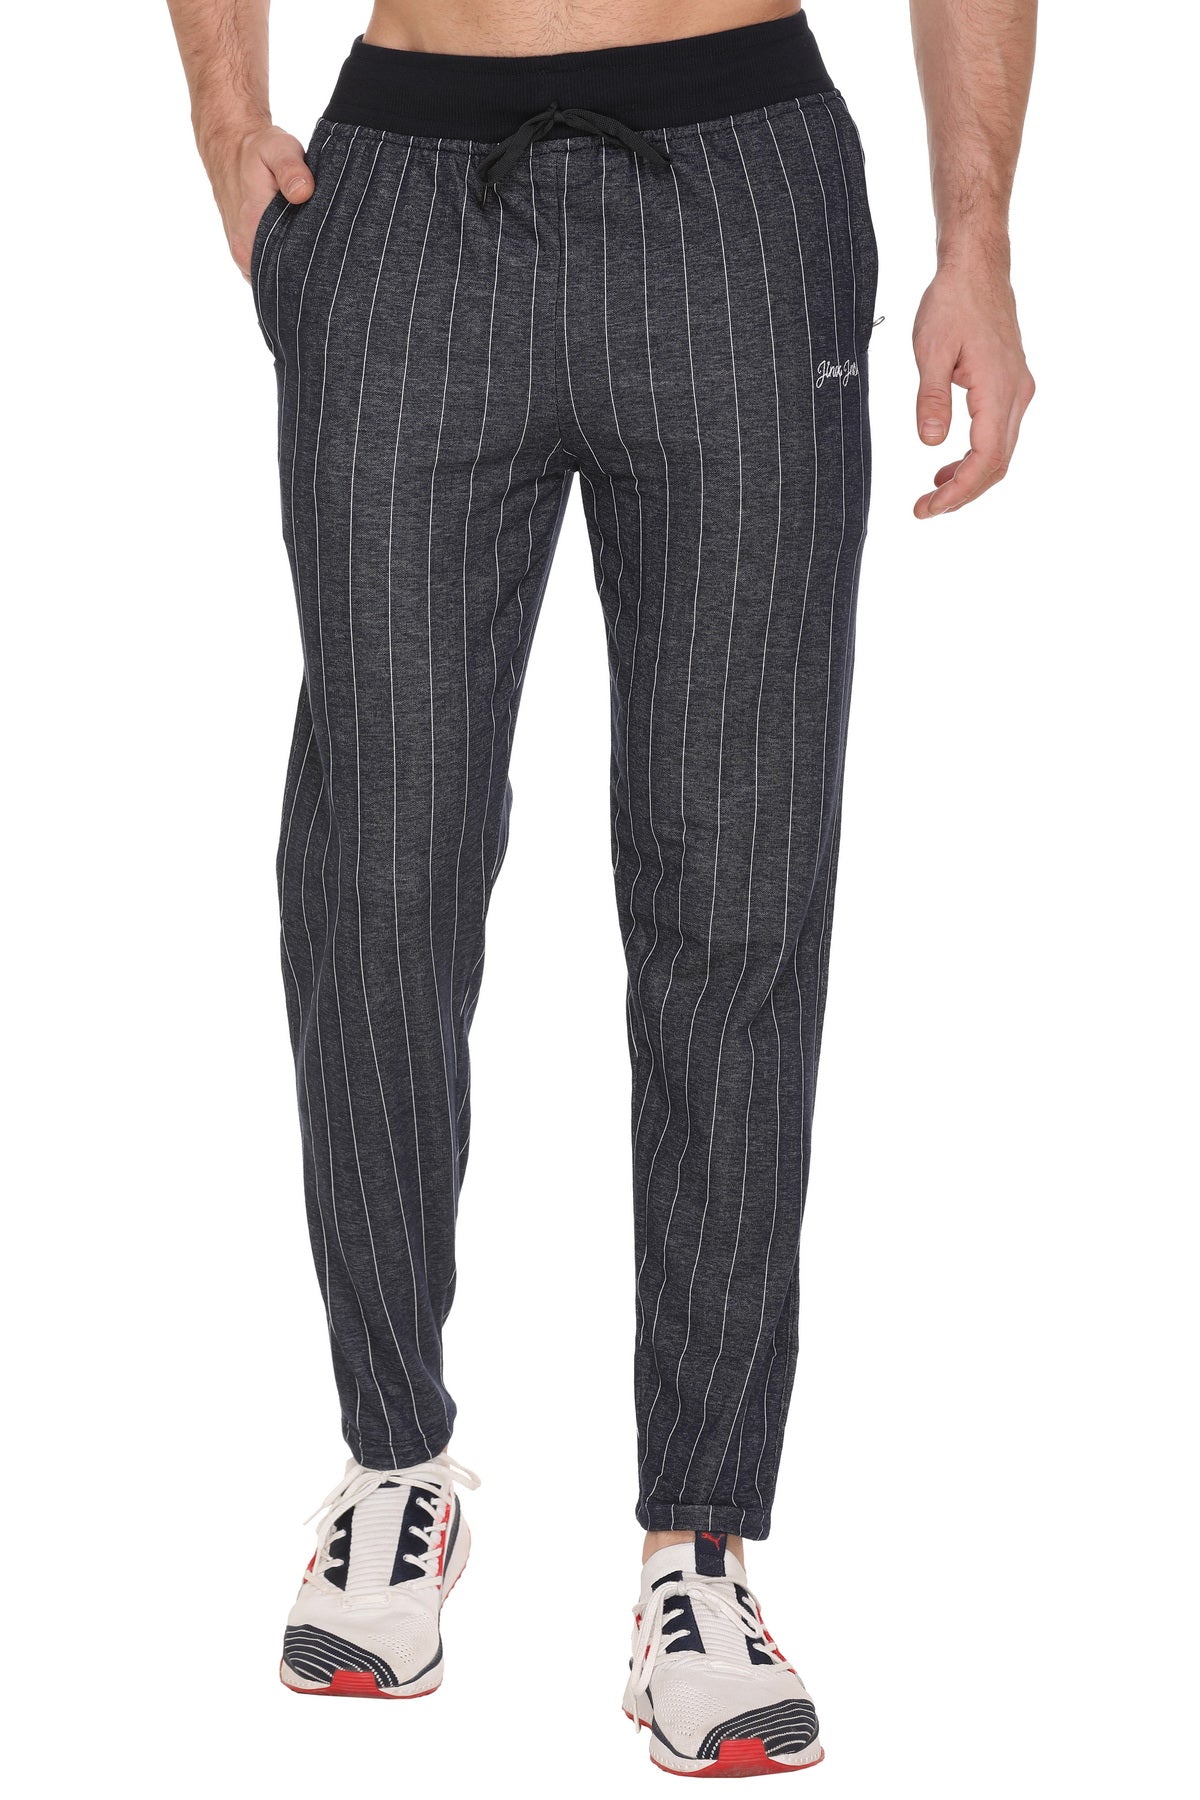 Stylish Blue Cotton Jinxer Pajama Pants For Men Online in India at best prices